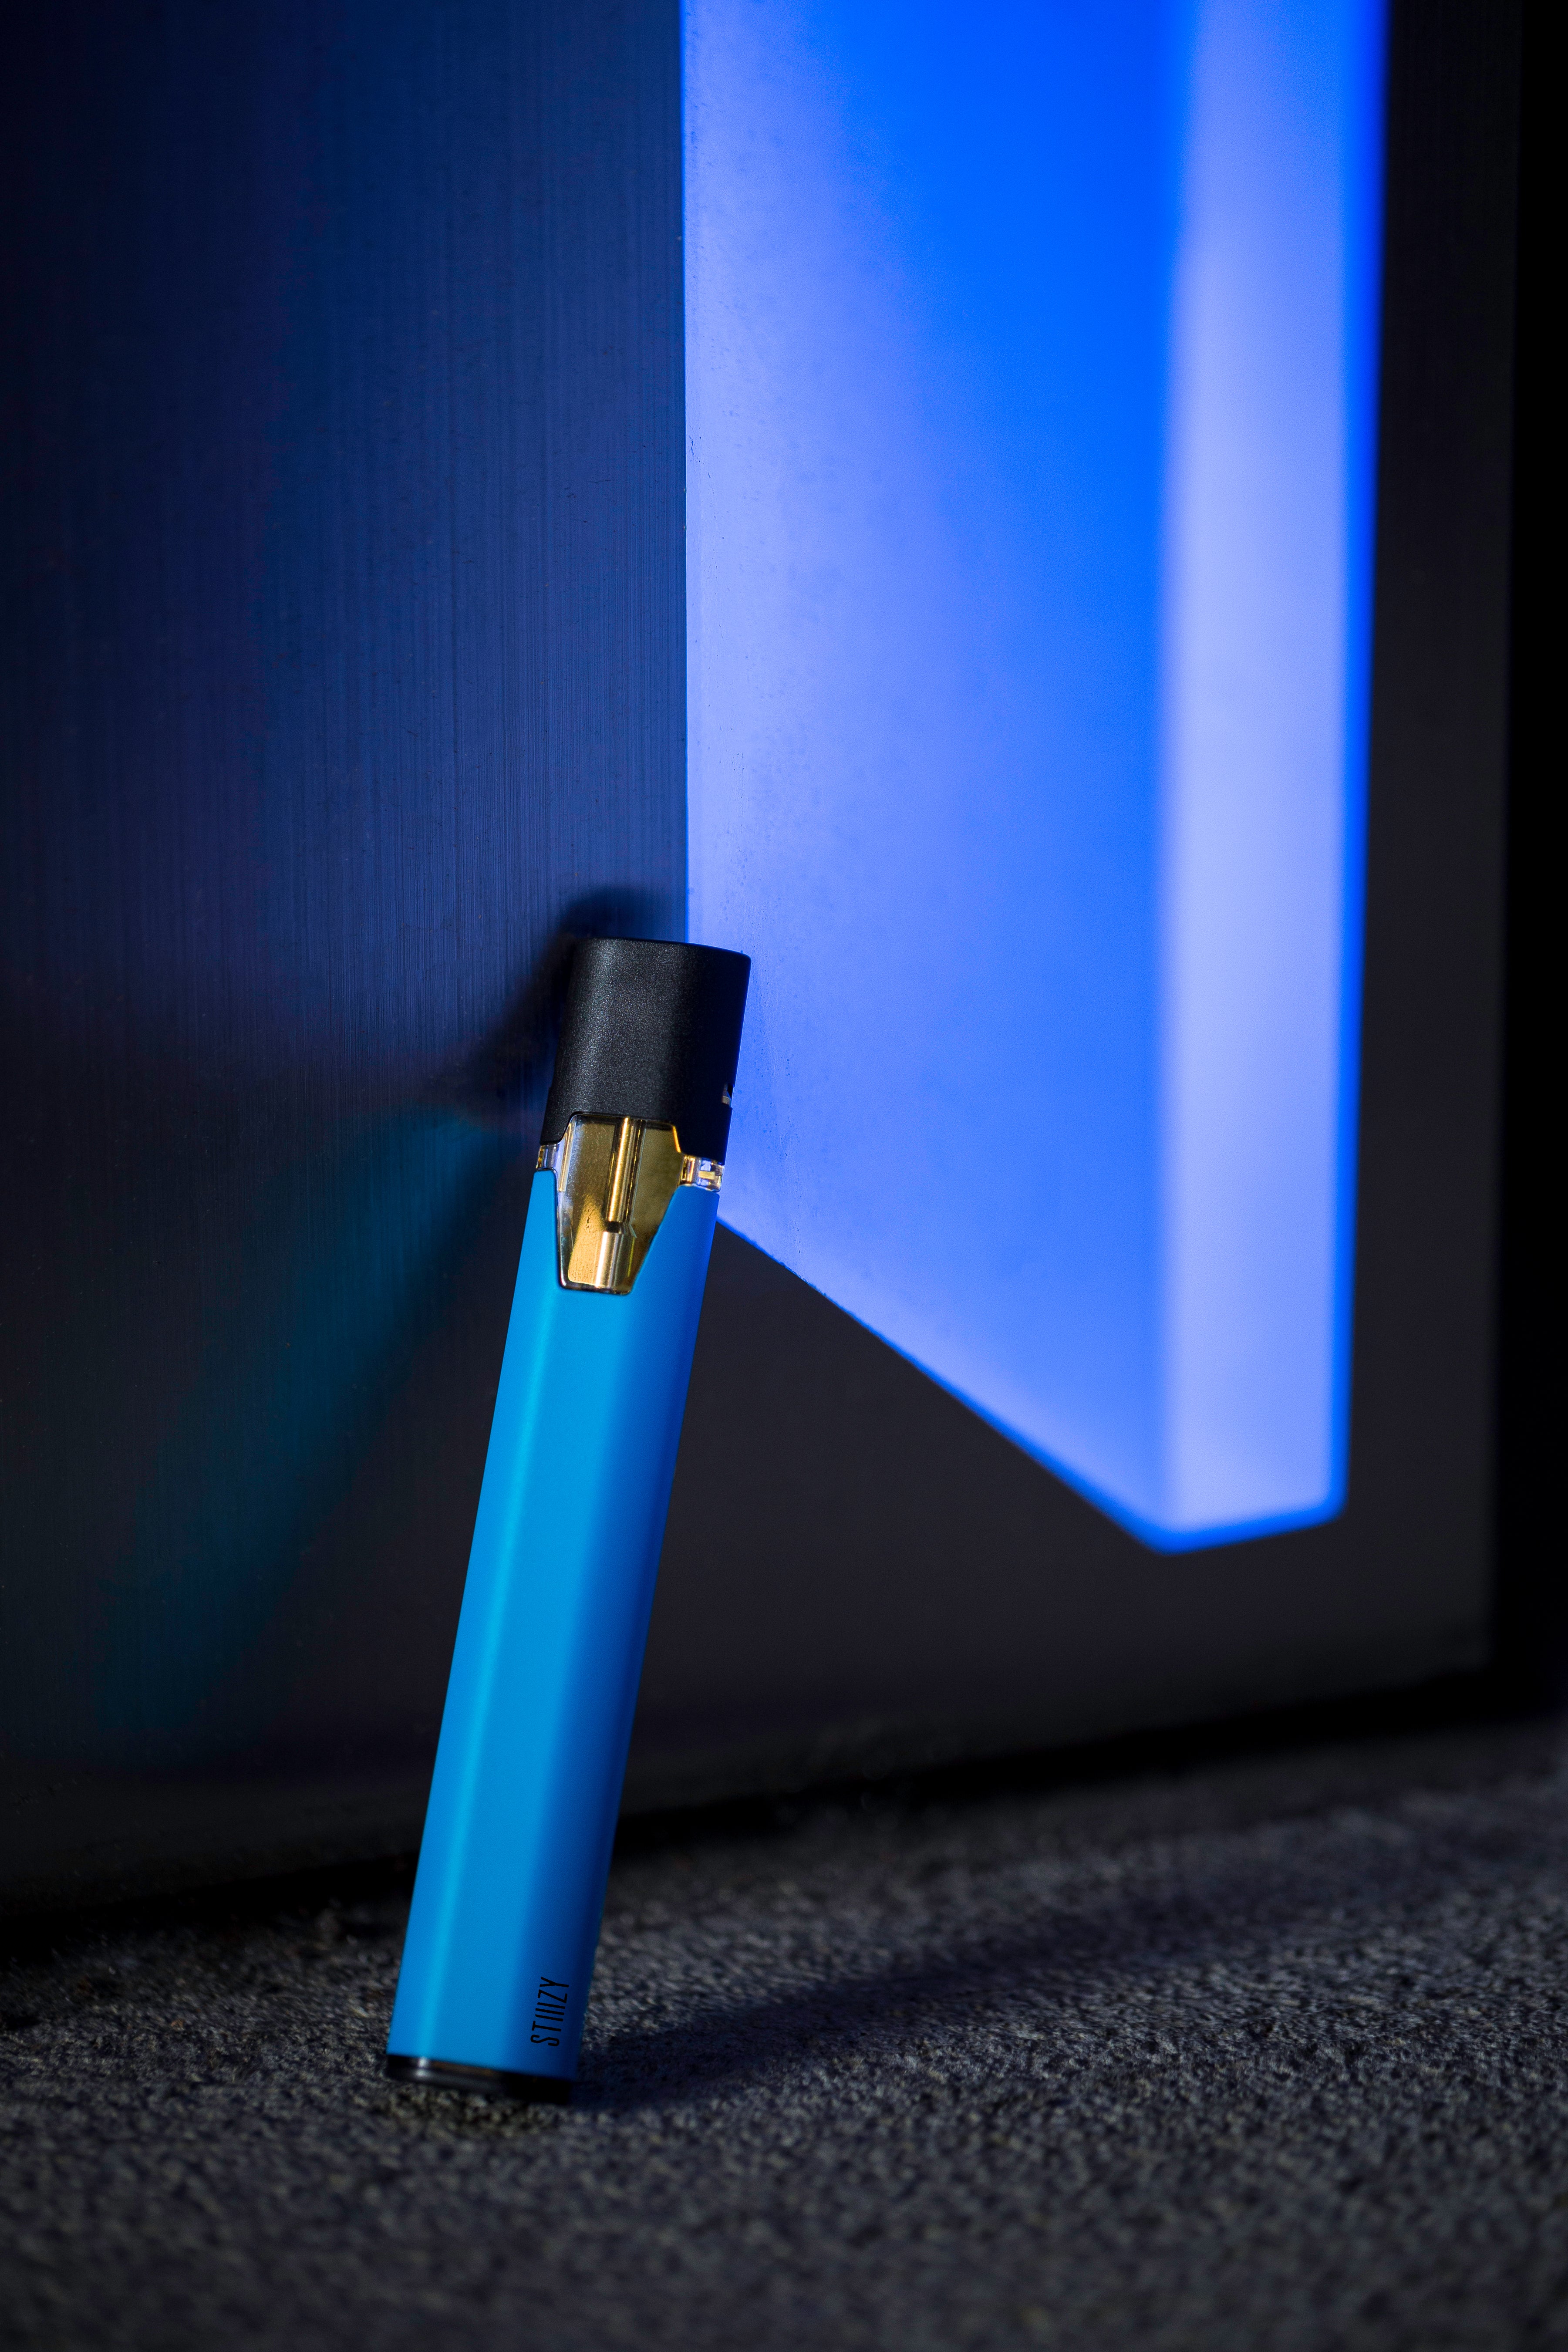 A neon blue STIIIZY weed pen battery with its vape pod attached leans against a neon blue wall.